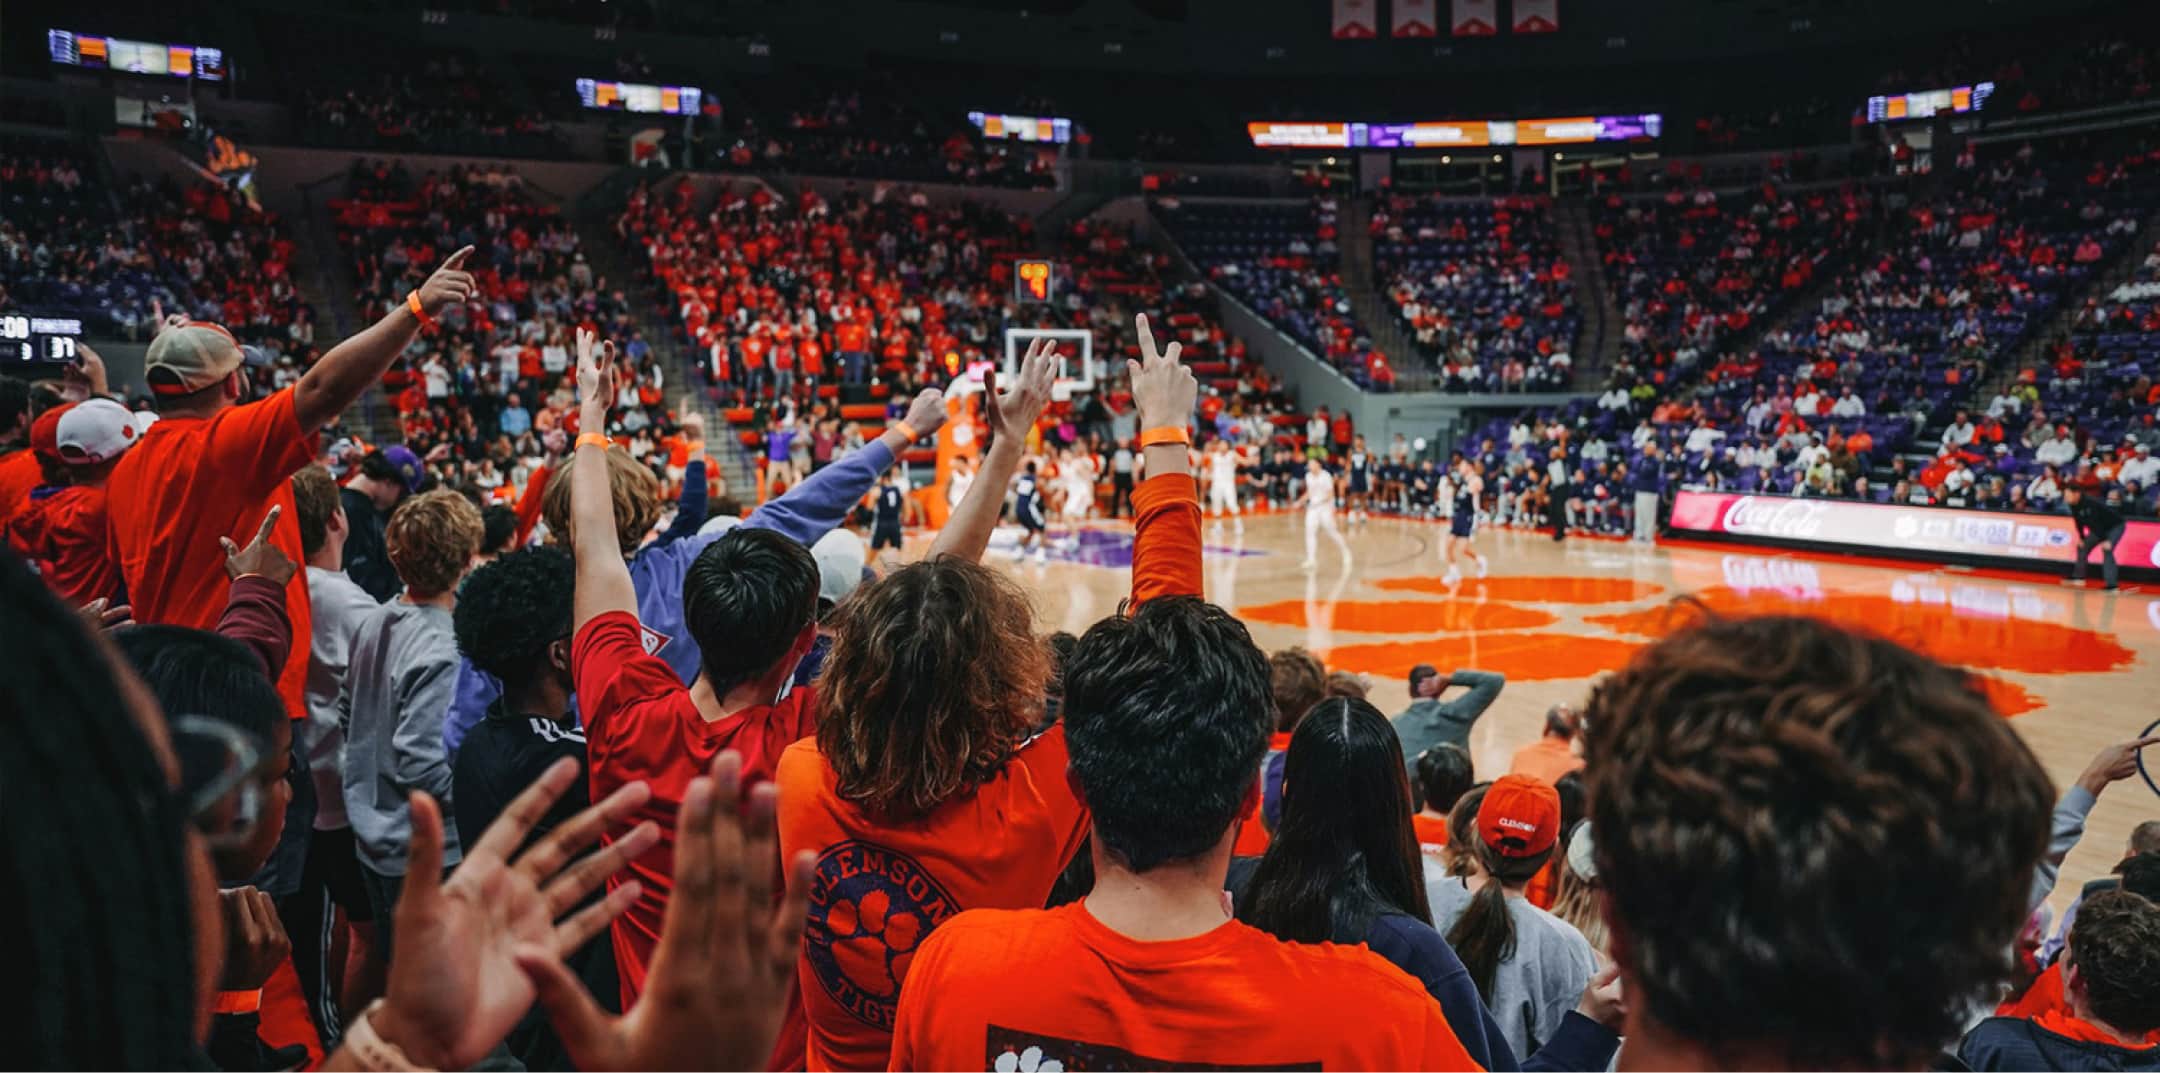 Crowd cheering at a Clemson basketball game